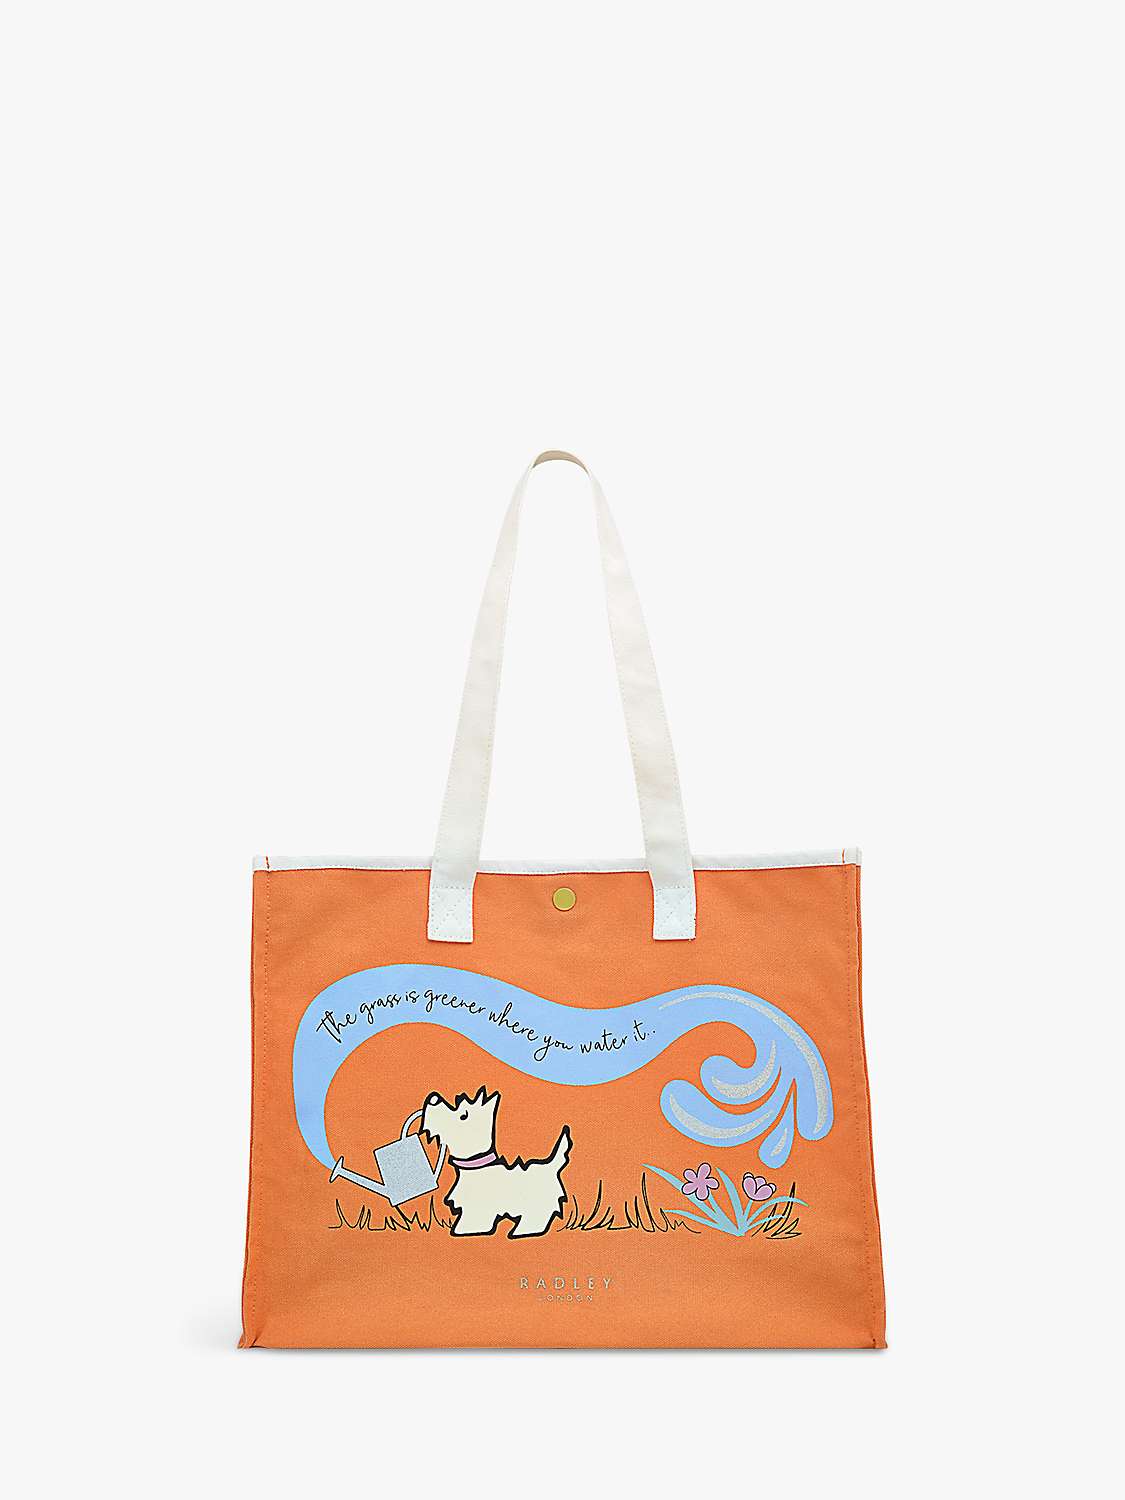 Buy Radley The Grass Is Greener Large Open Top Tote Bag, Apricot Online at johnlewis.com